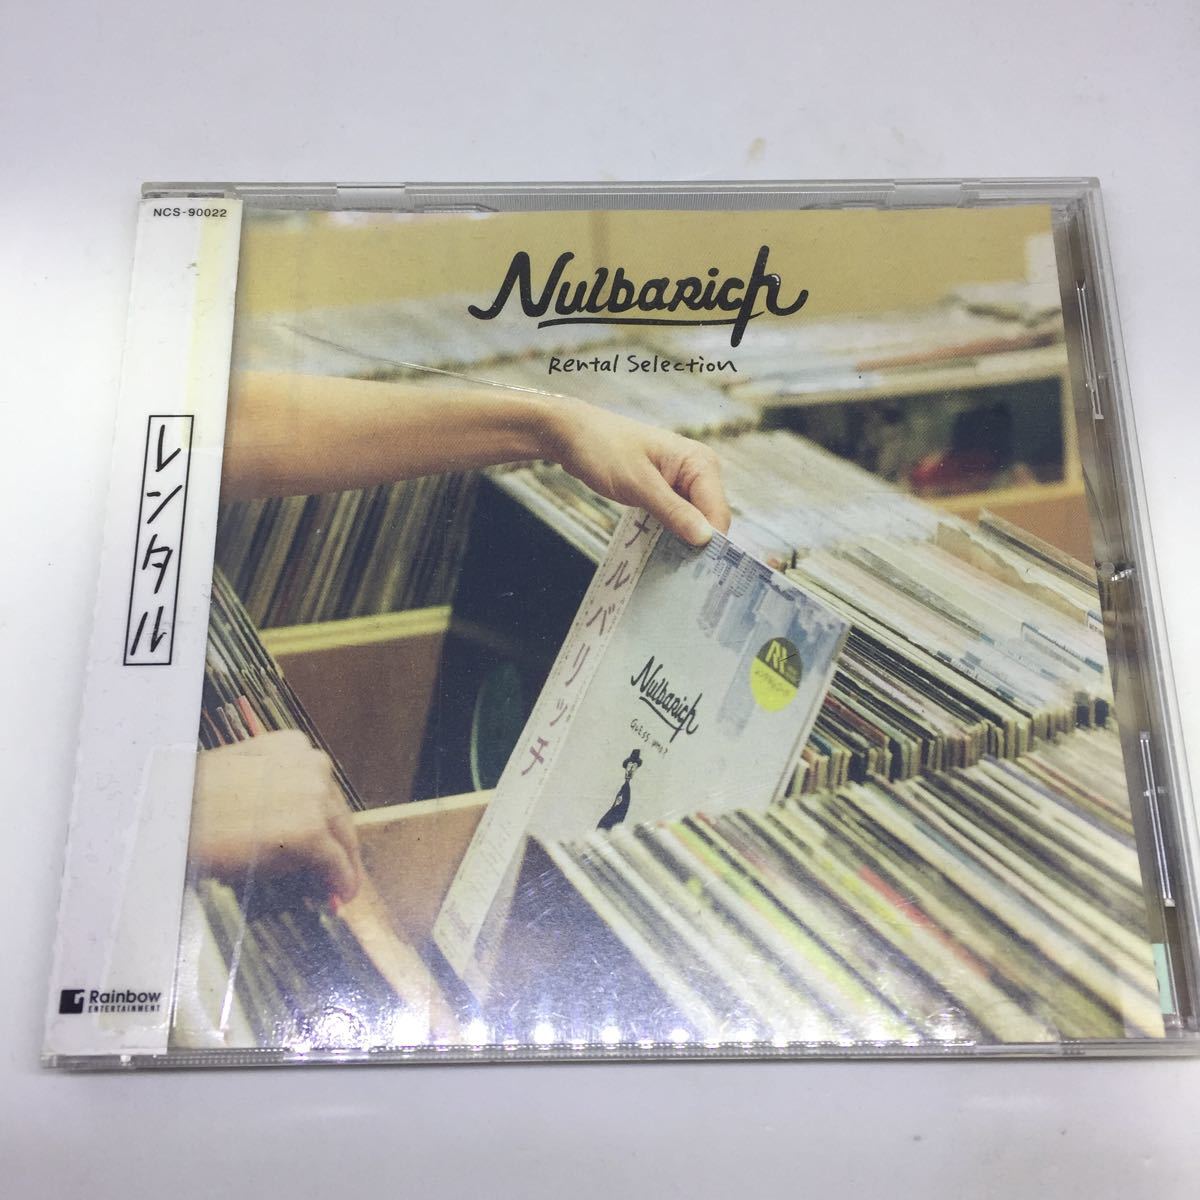 【59%OFF!】 85%OFF ナルバリッチ Nulbarich レンタル限定盤 CD Rental Selection corporate-event-agency.com corporate-event-agency.com